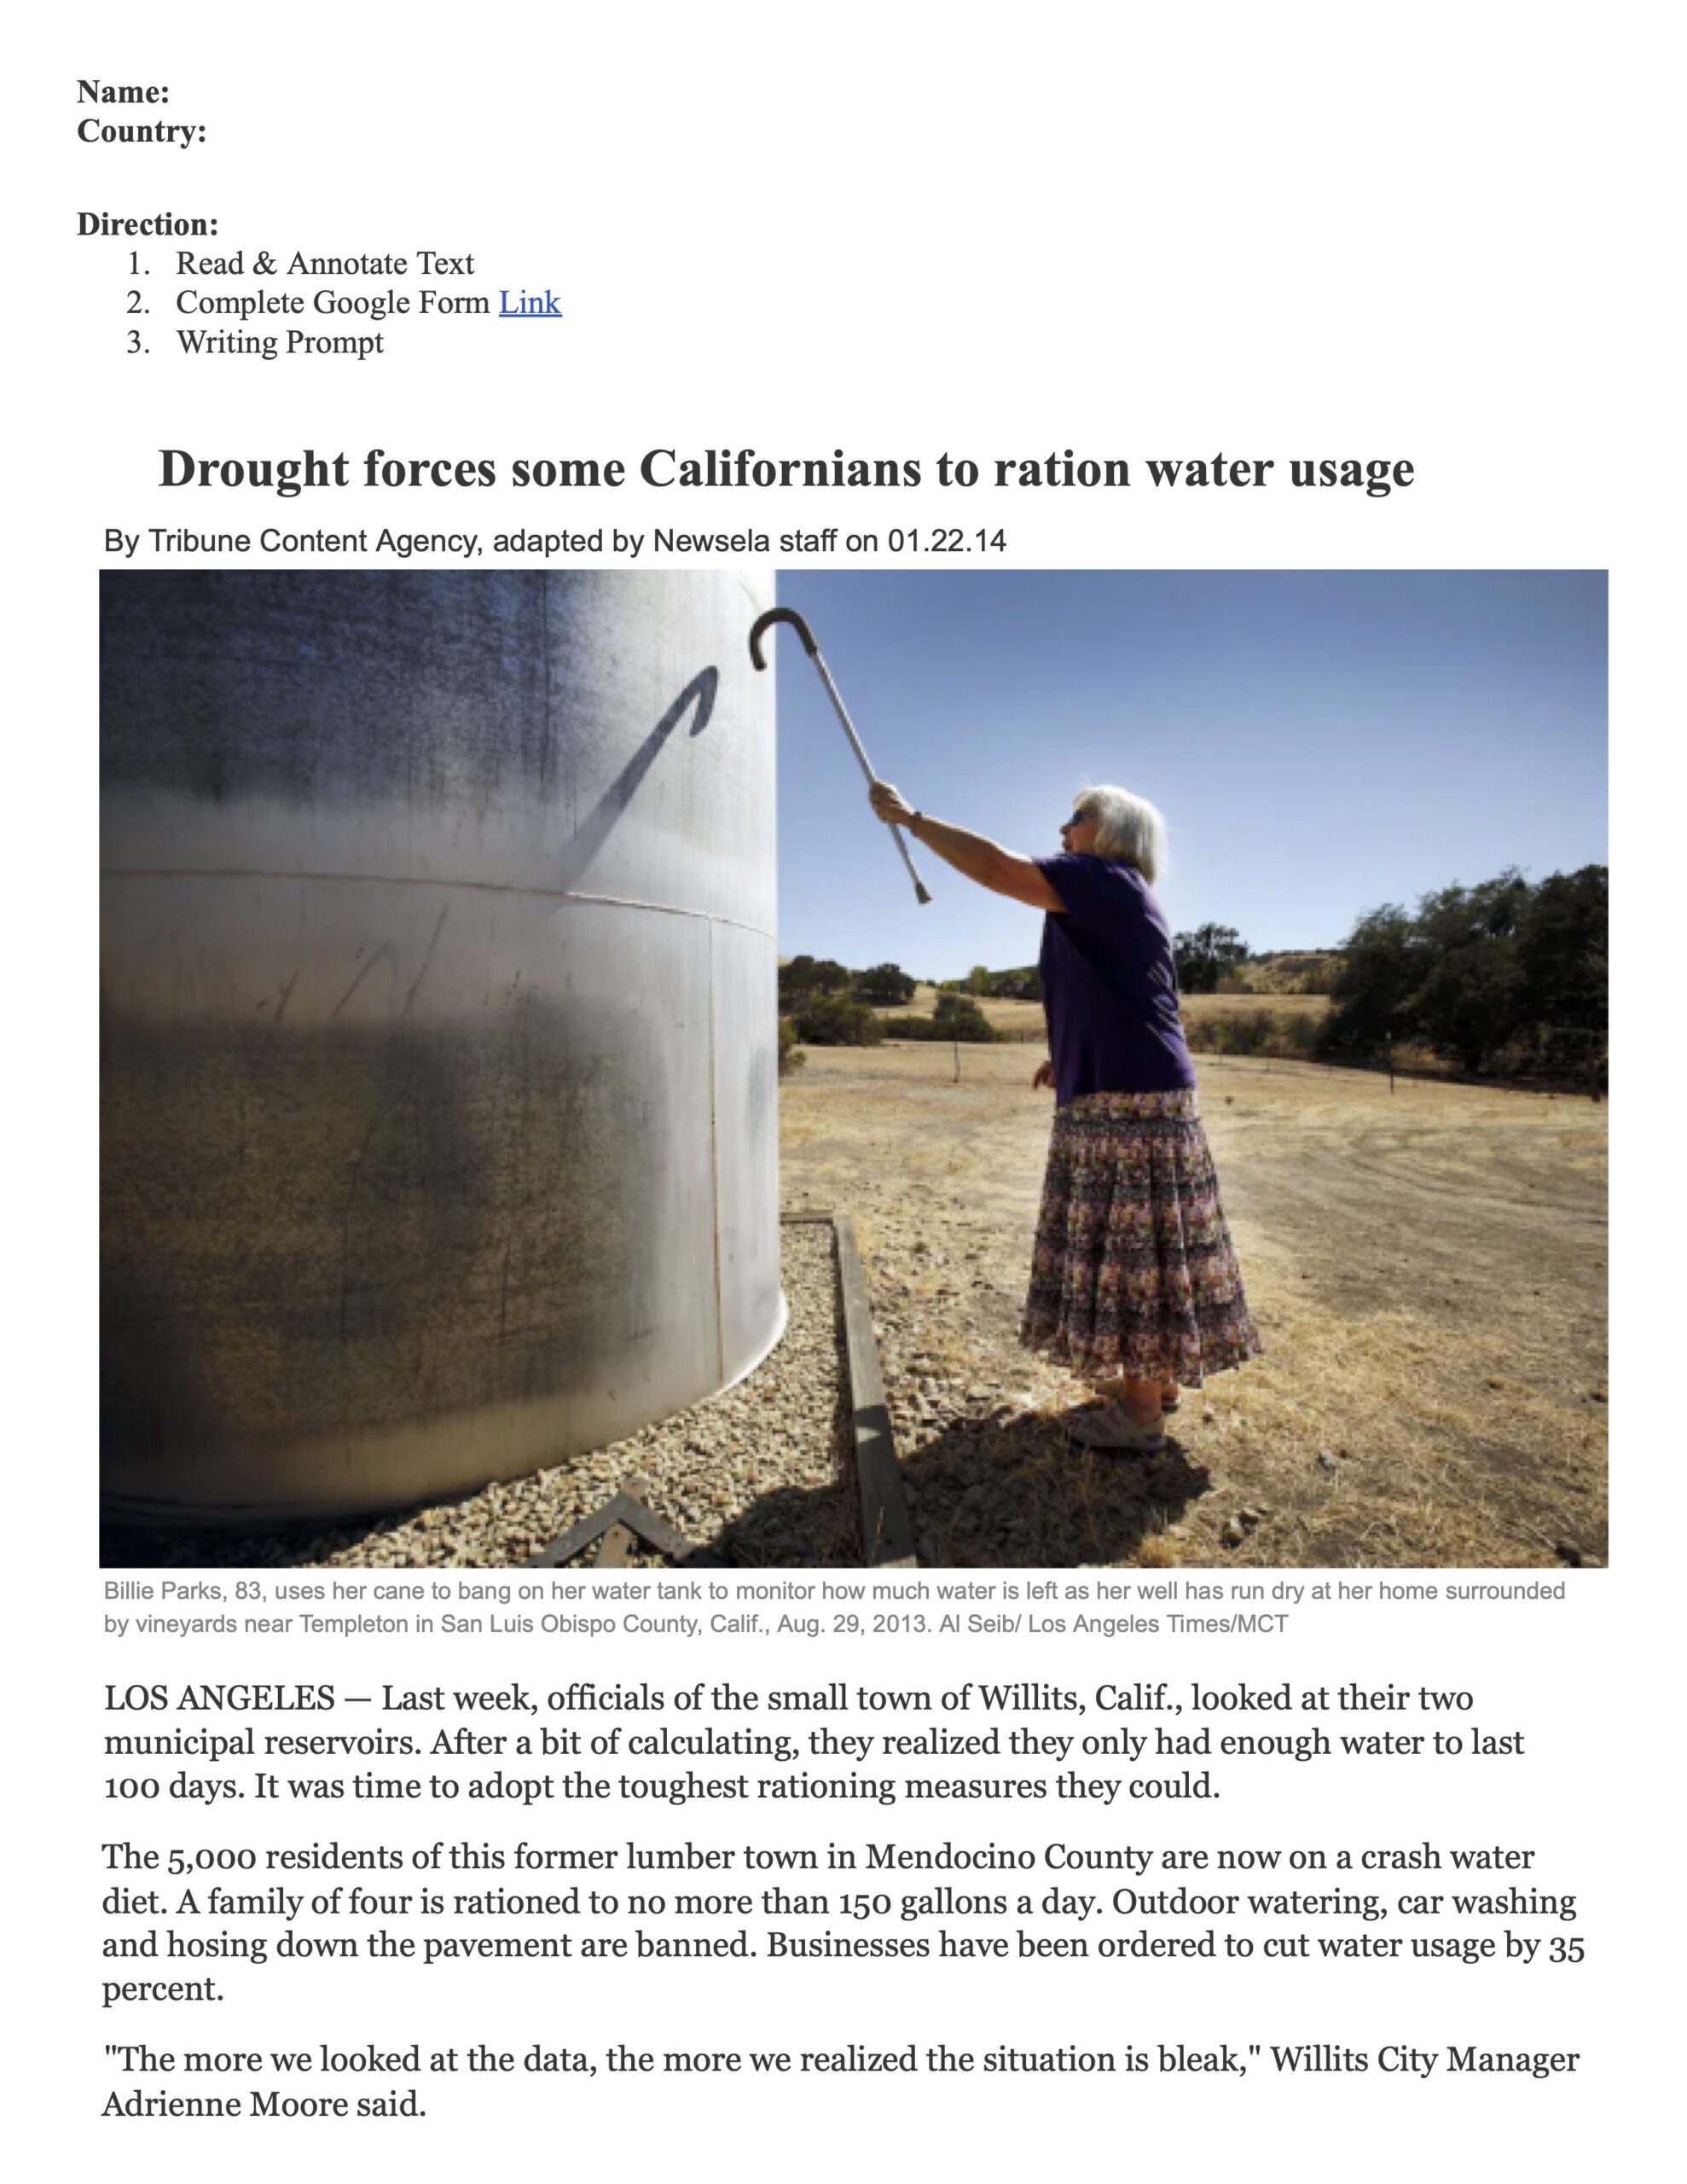 Newspaper article on California drought